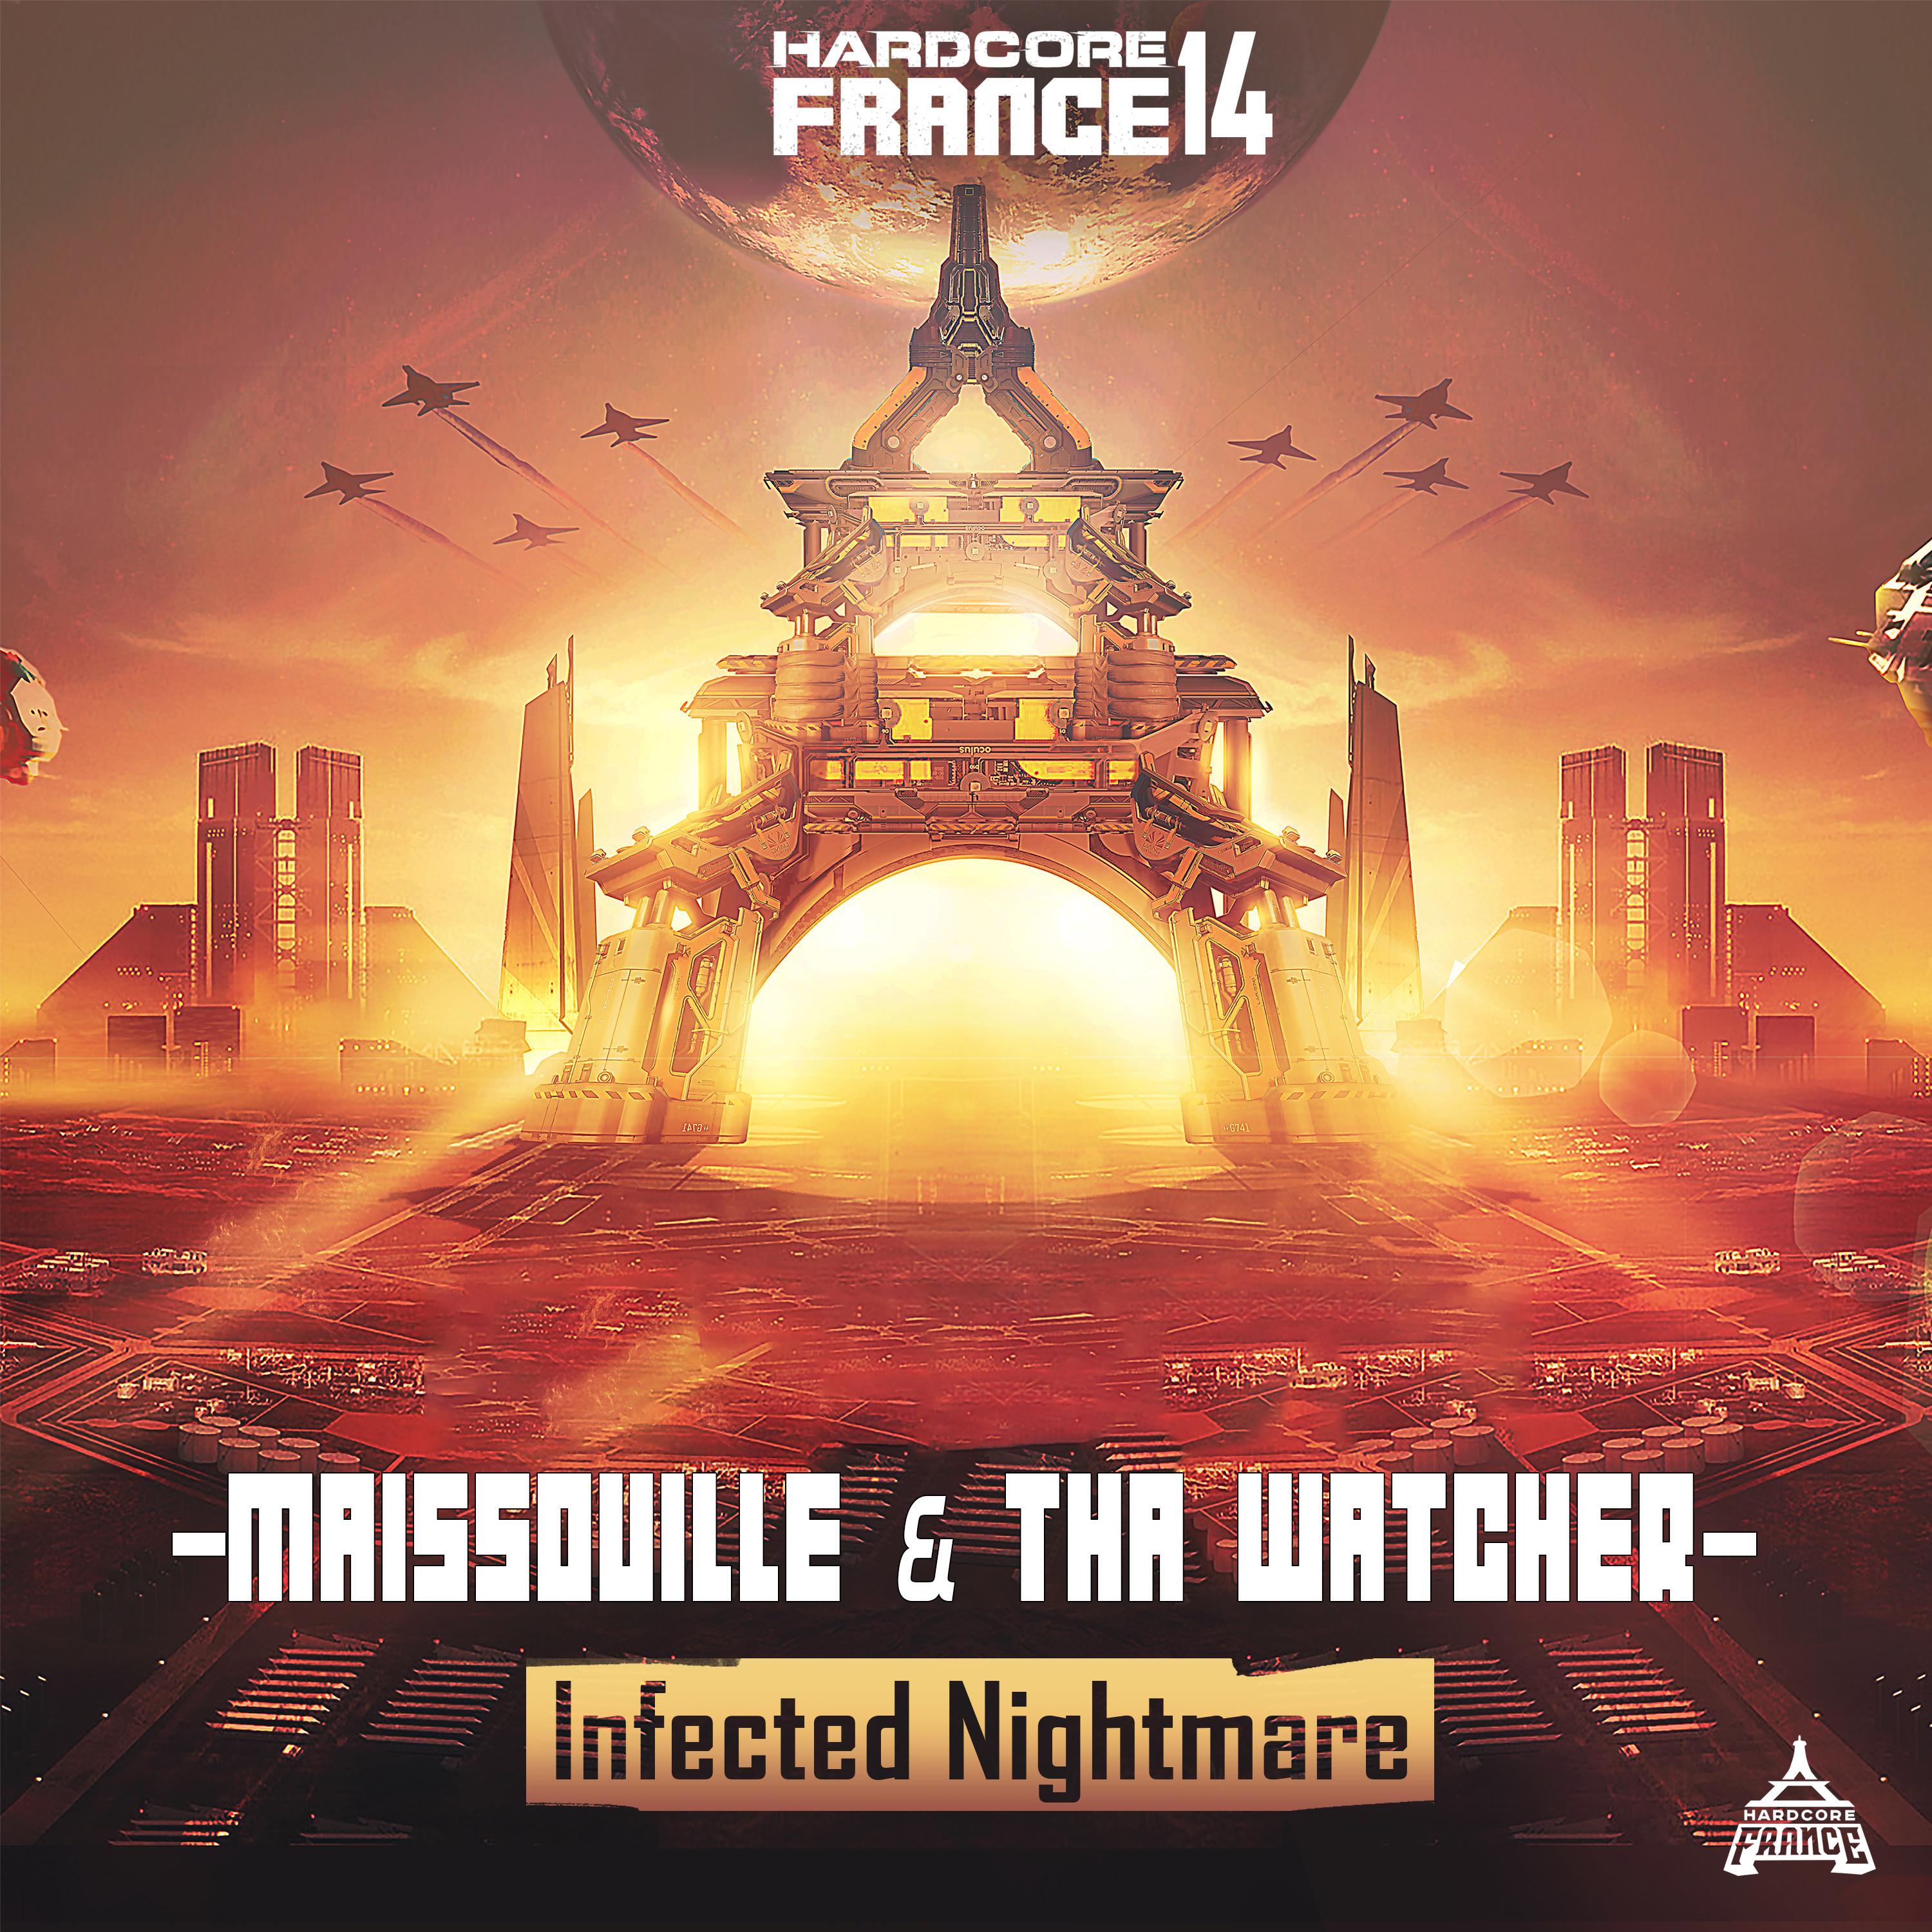 Hardcore France 14 - Infected Nightmare